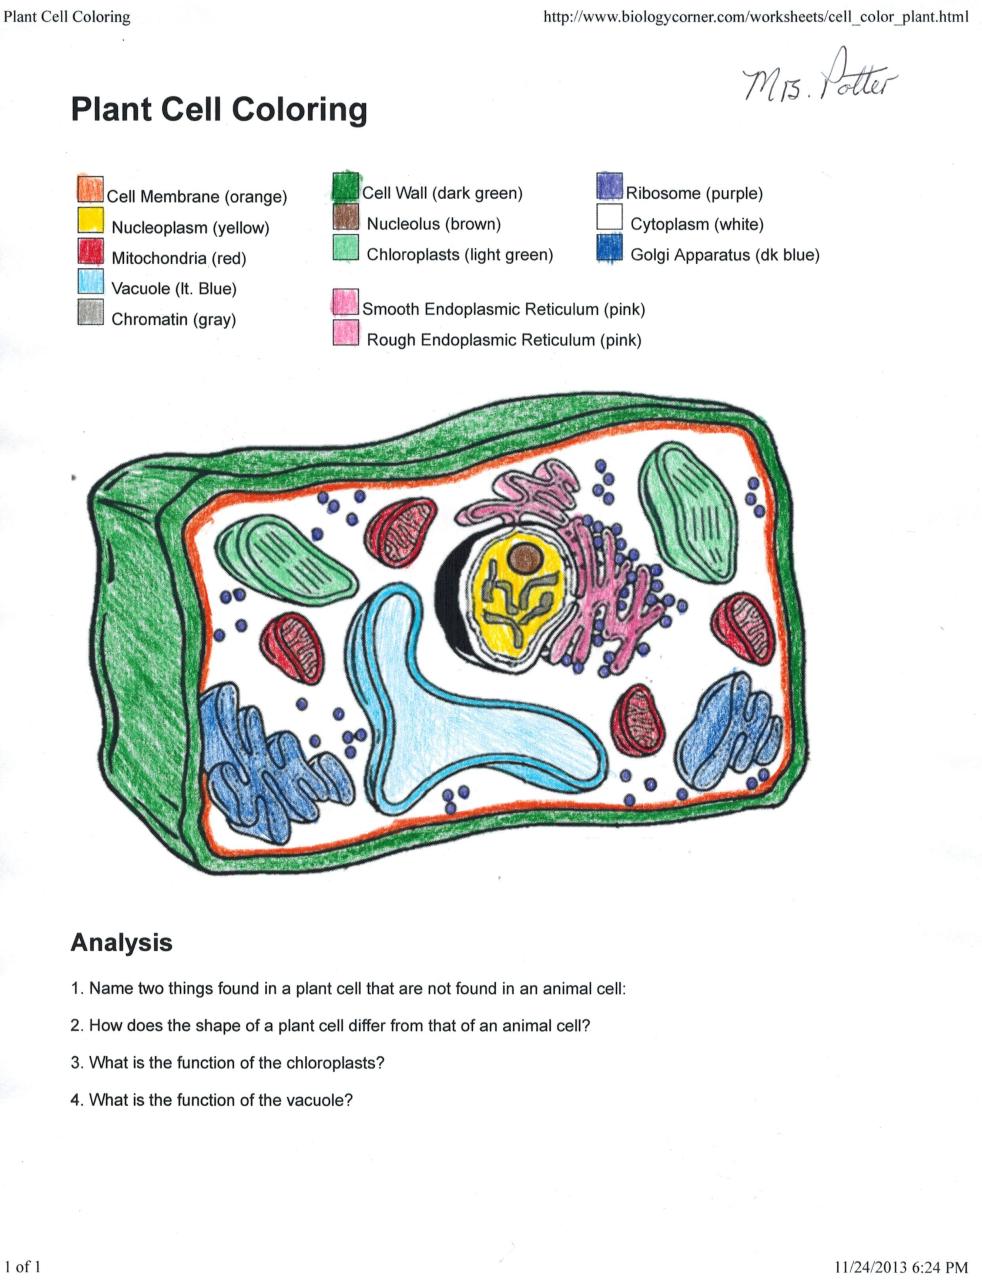 Animal Cell Coloring Answer Key Animal Cell